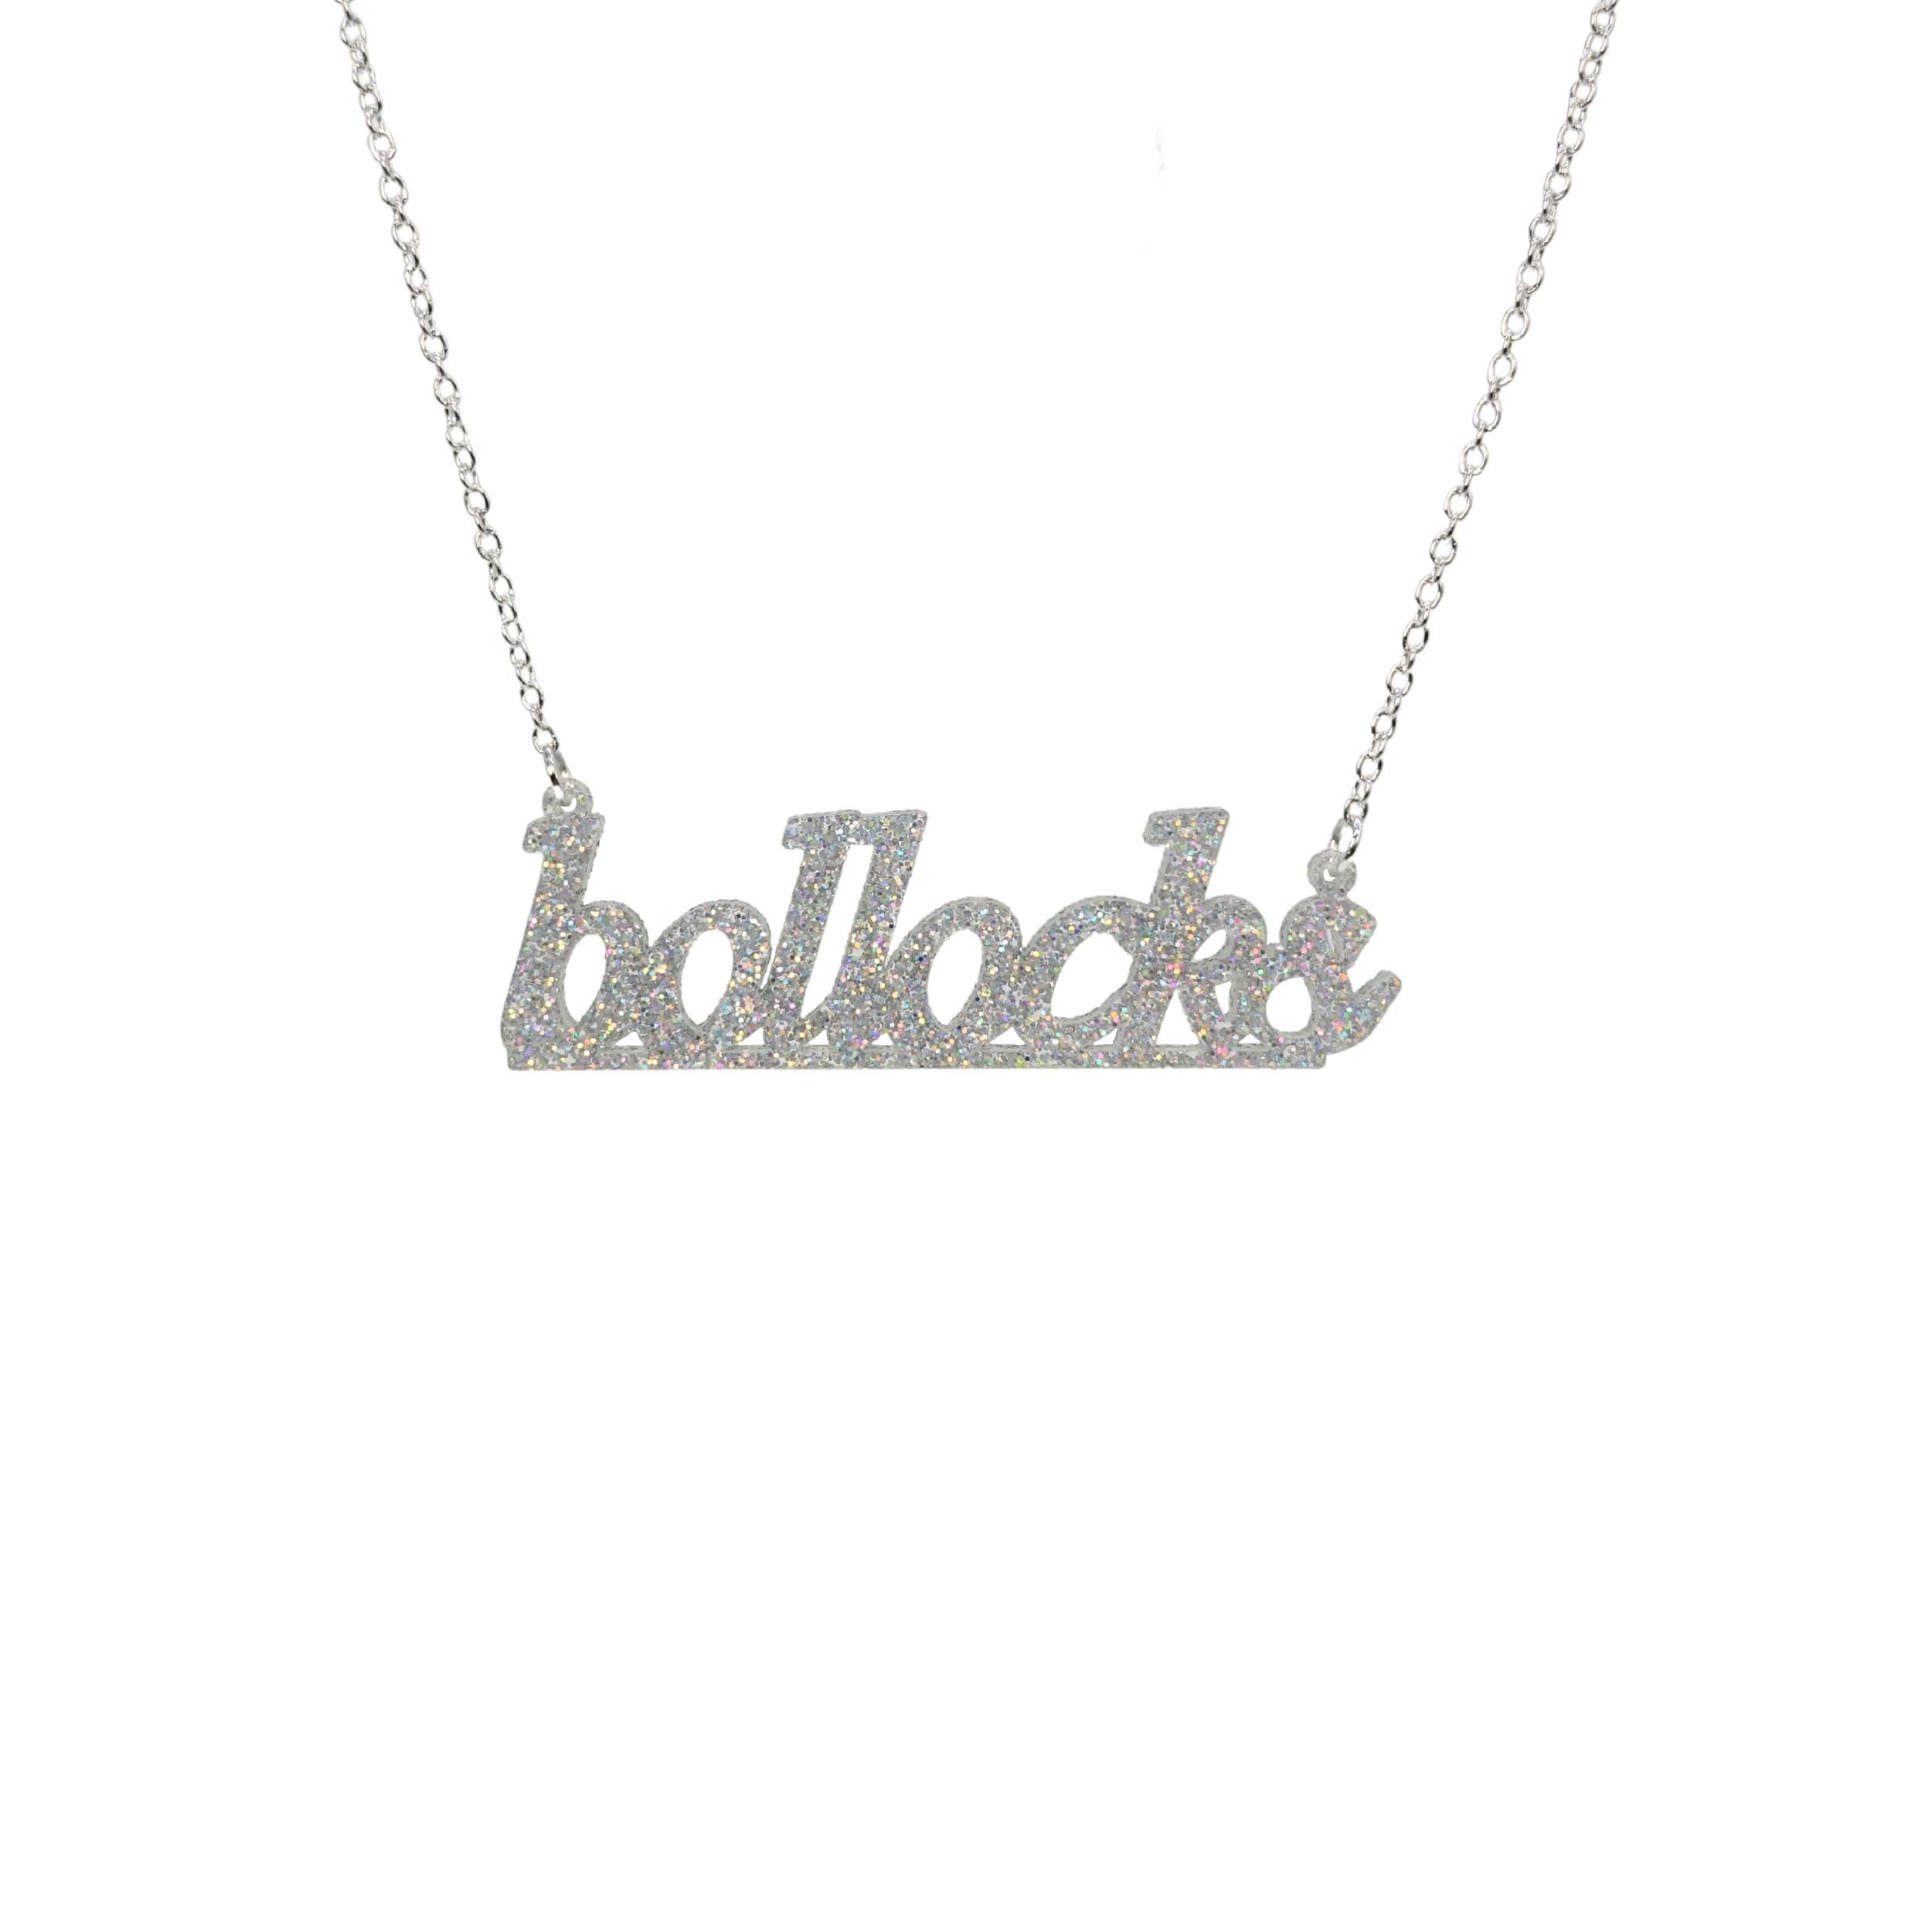 Bollocks necklace in silver glitter shown hanging against a white background. 